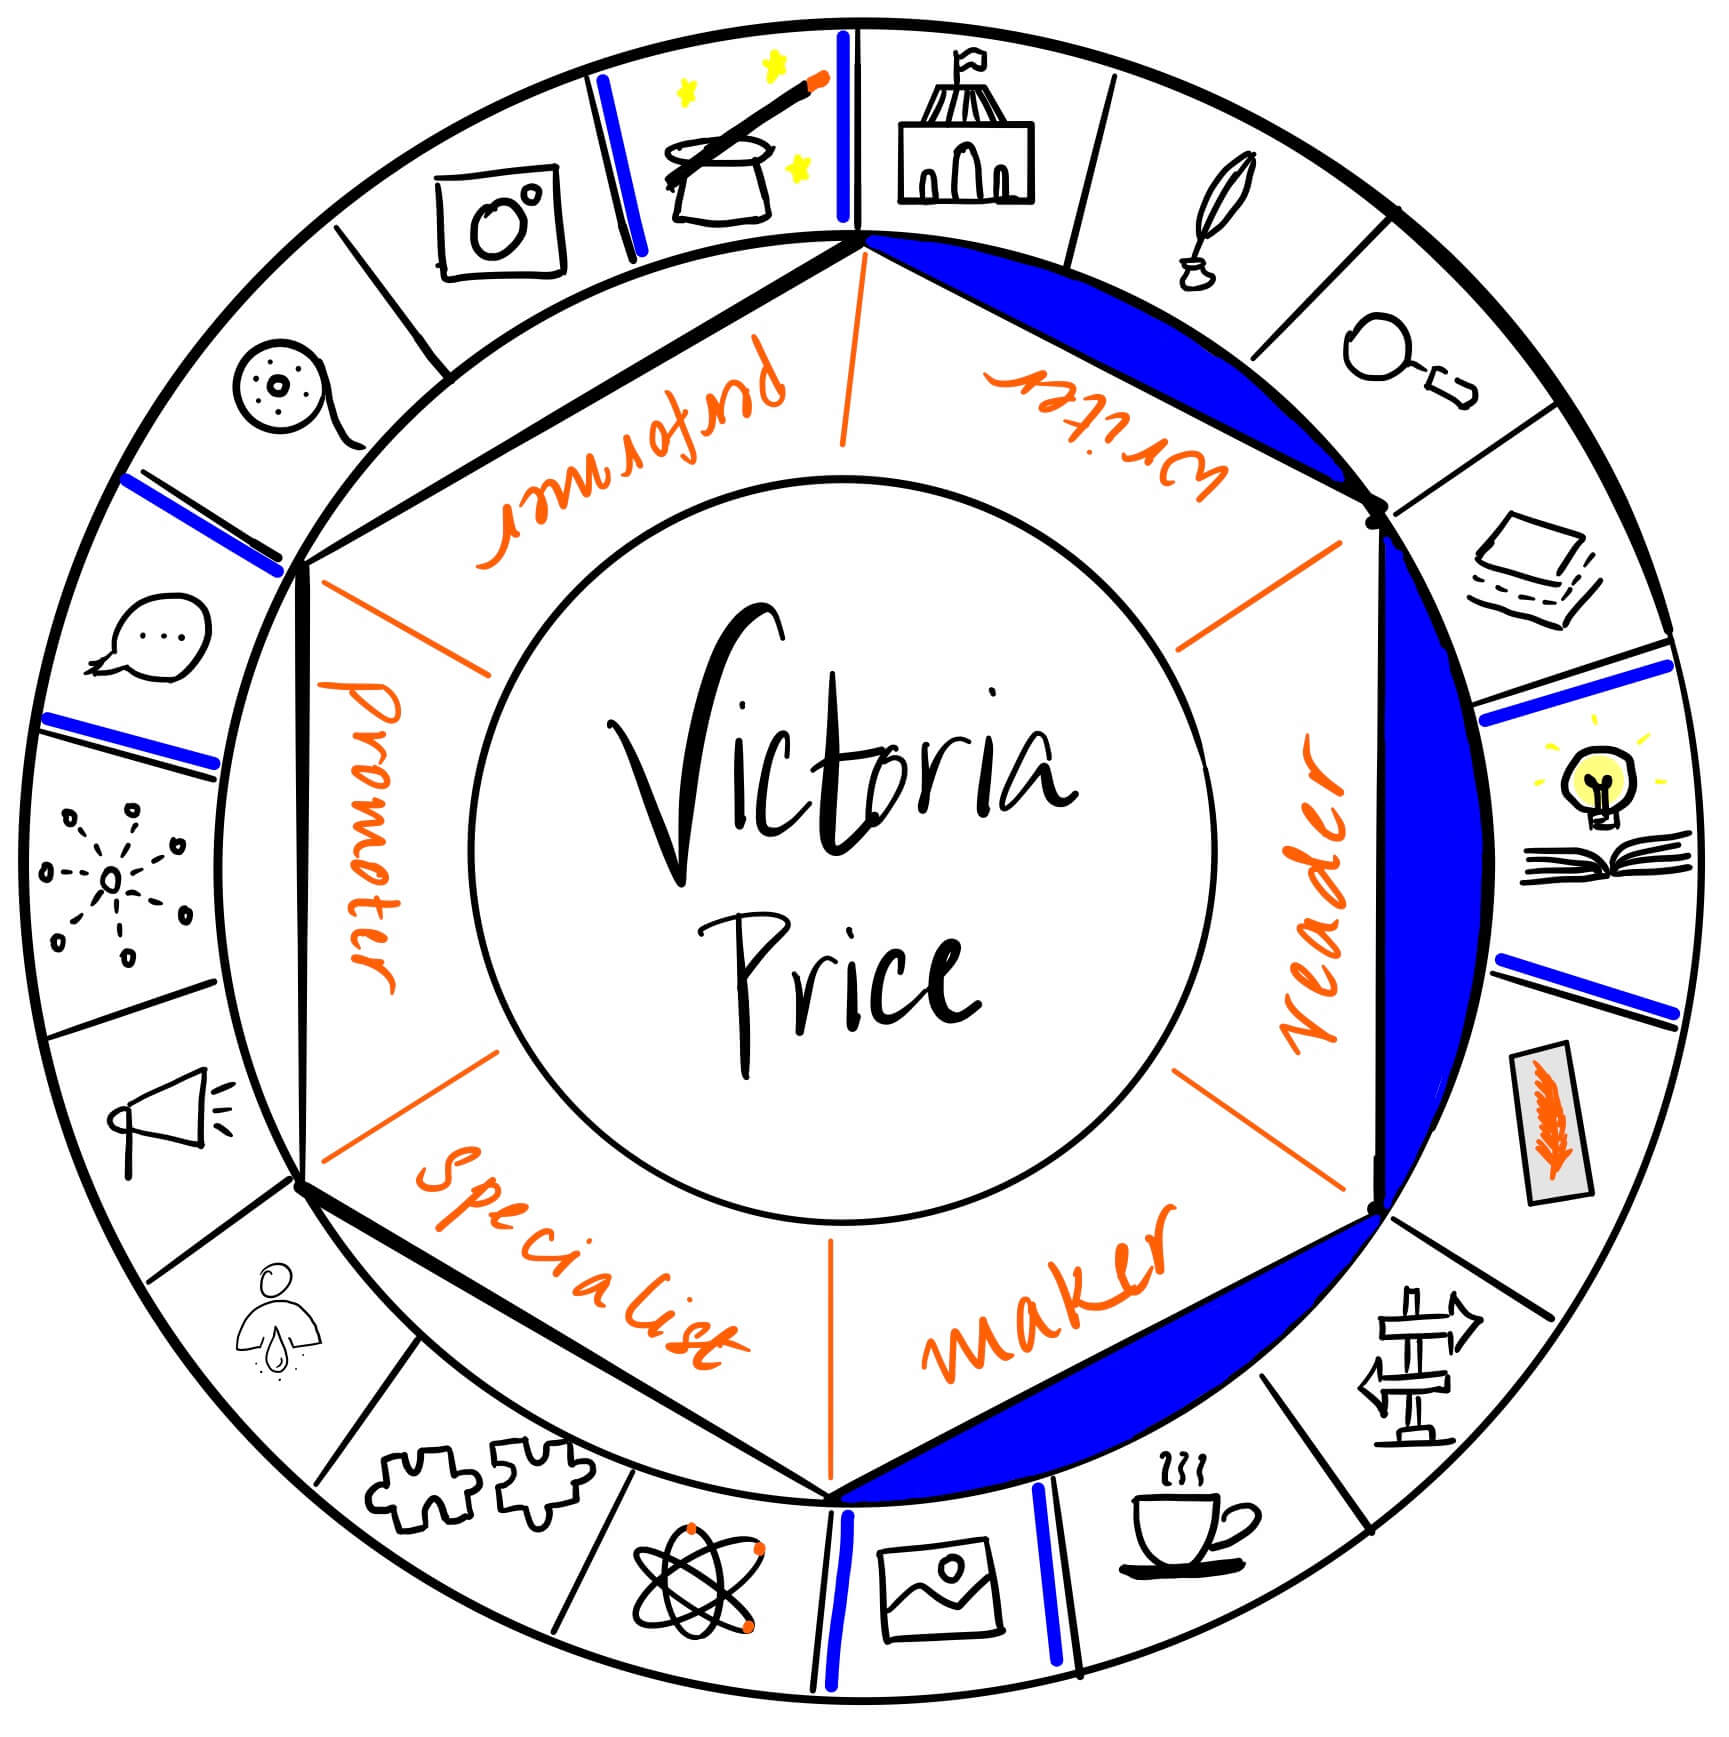 Victoria Price is a reader, maker and writer. It's a pleasure to have her over on The Creator's Roulette to talk about death and dying in fiction.